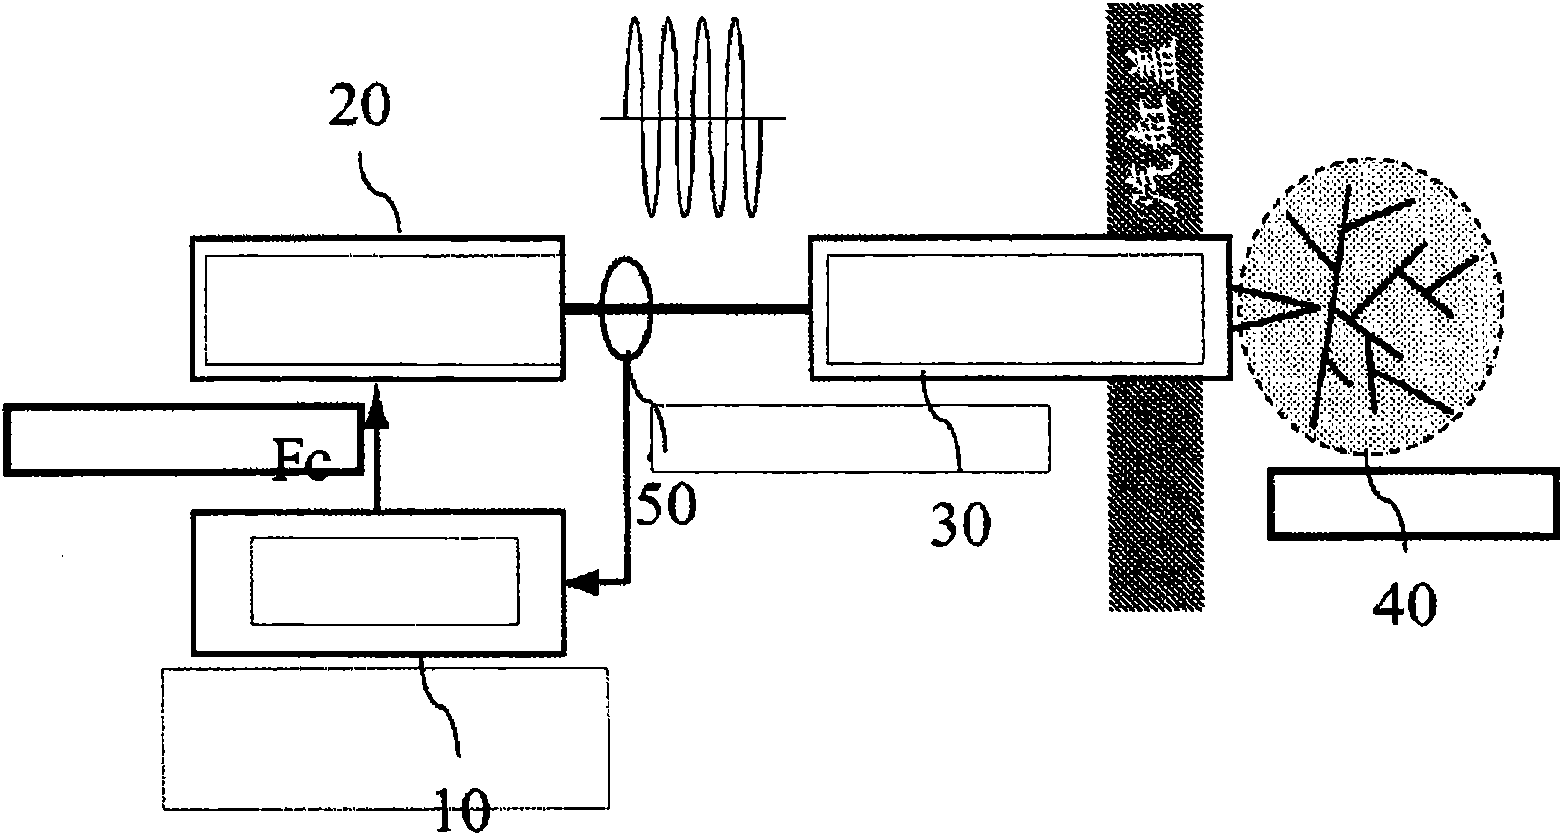 Optimisation of the excitation frequency of a radiofrequency plug